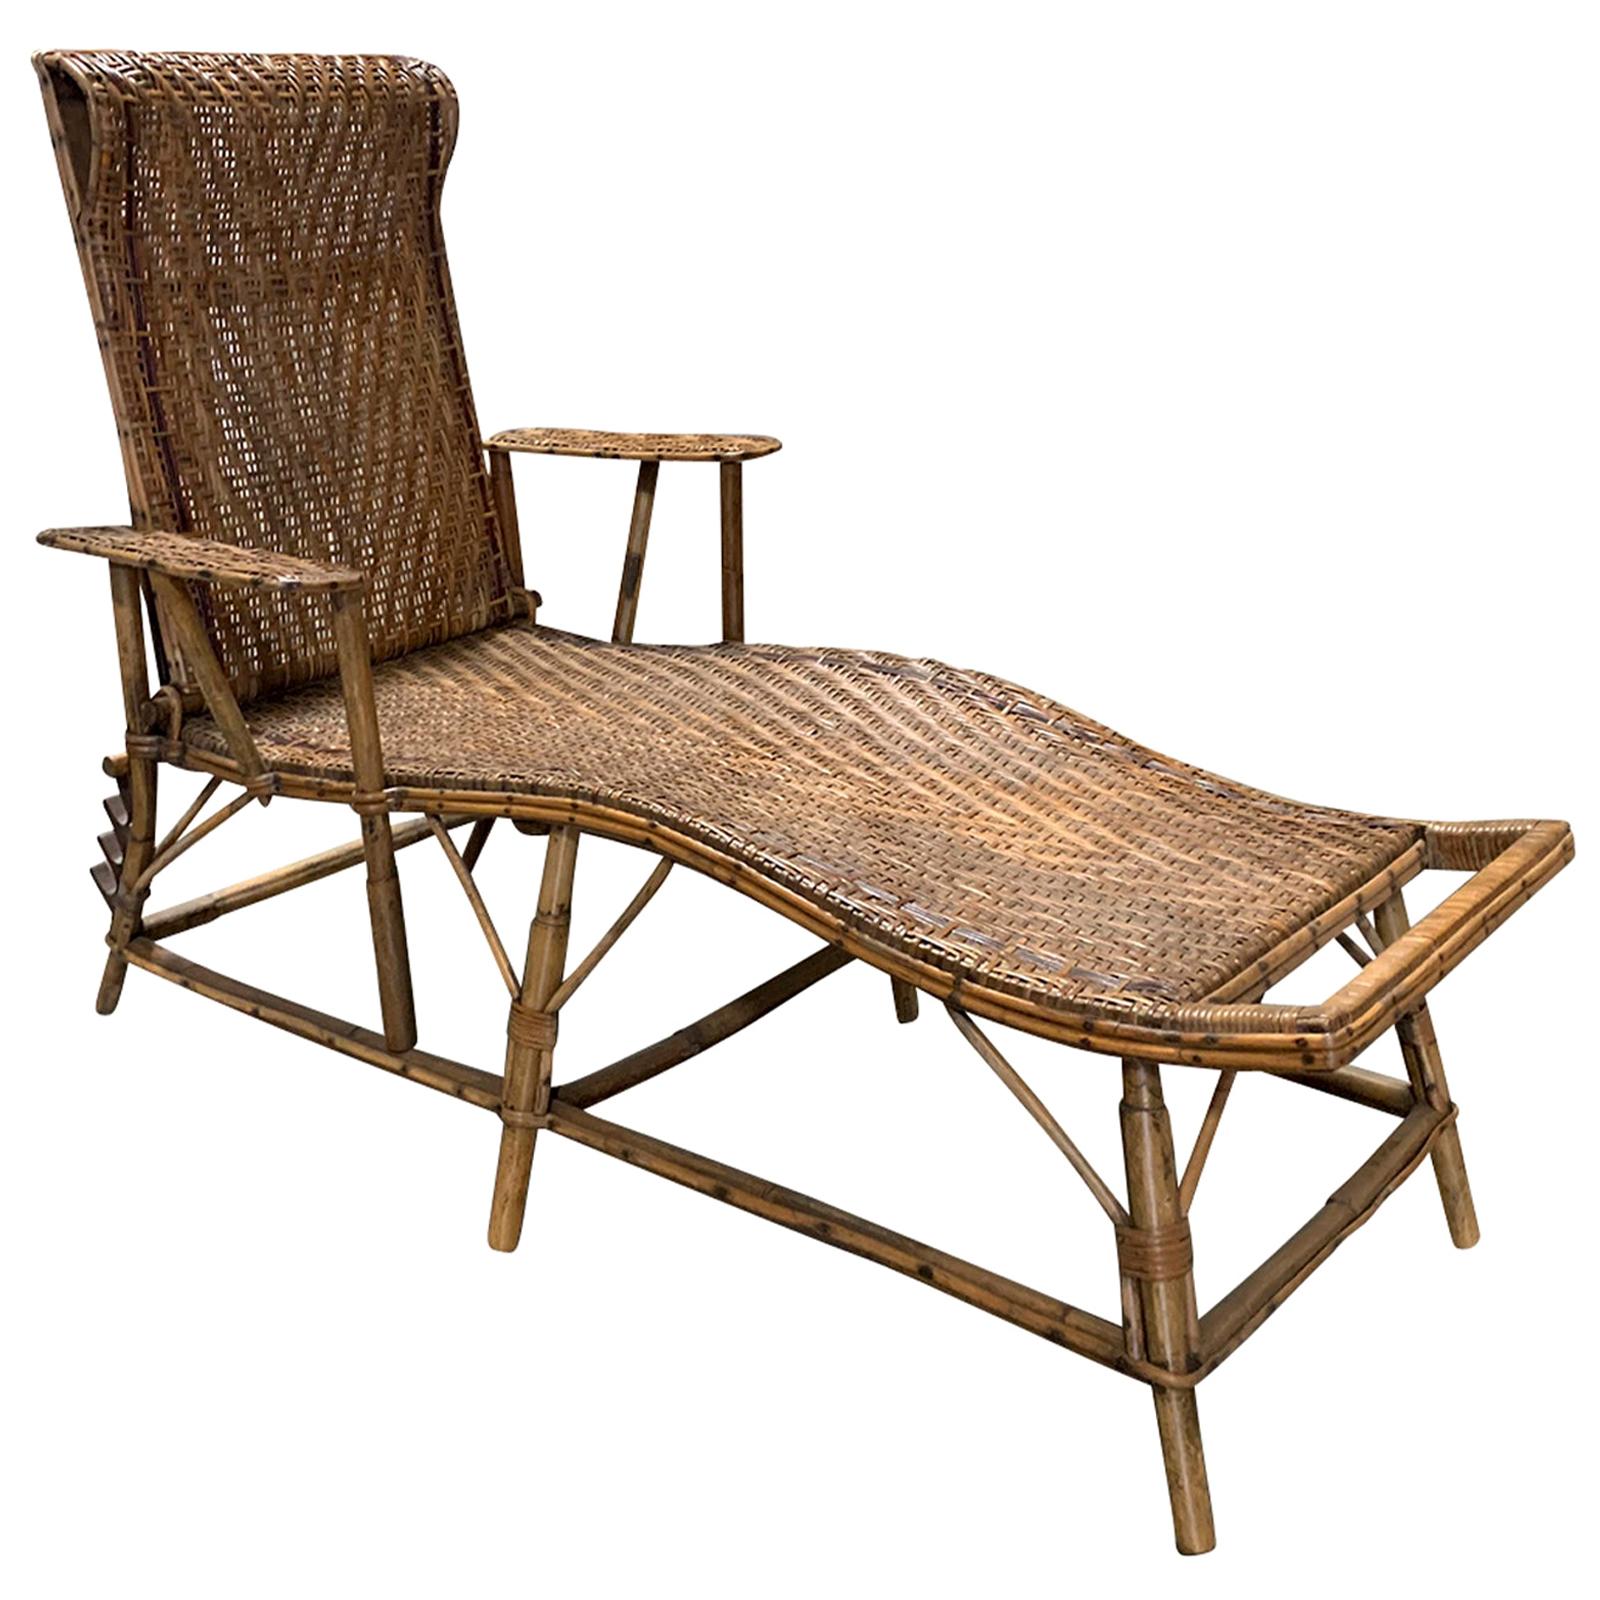 Early 20th Century Rattan and Bamboo Folding Chaise Lounge with Adjustable Back